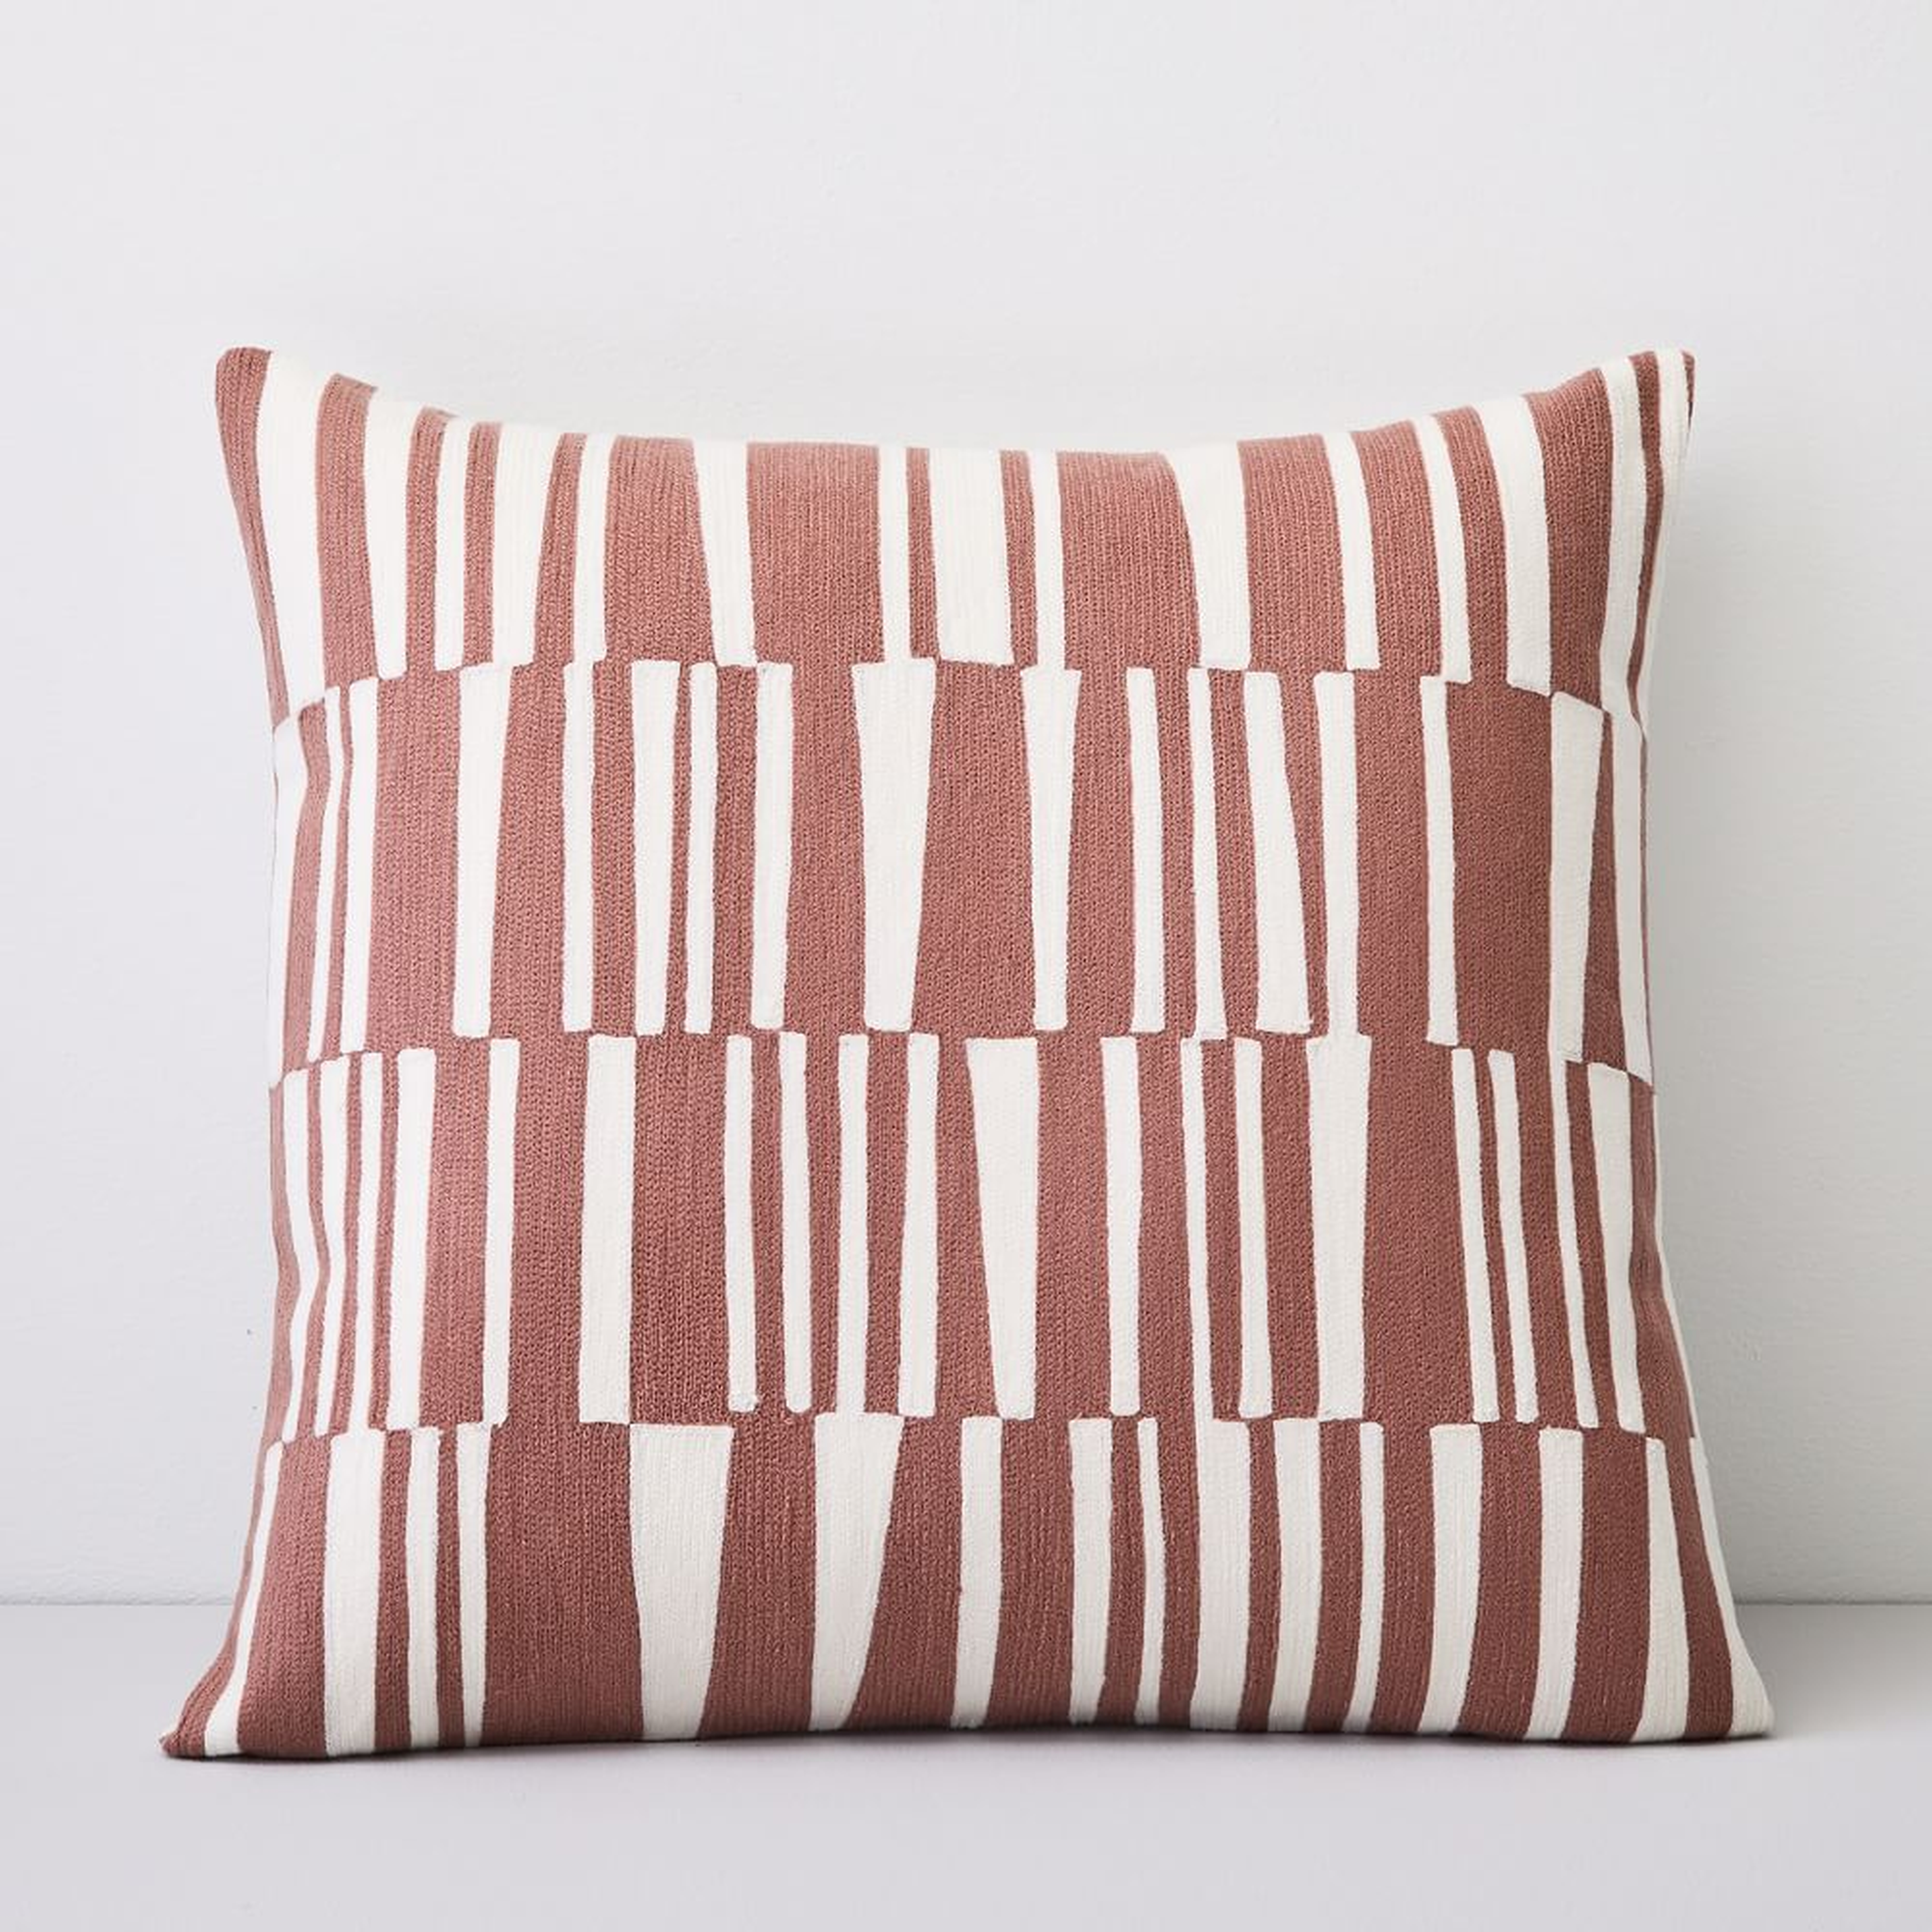 Crewel Linear Pillow Cover, Pink Stone, 24"x24" - West Elm